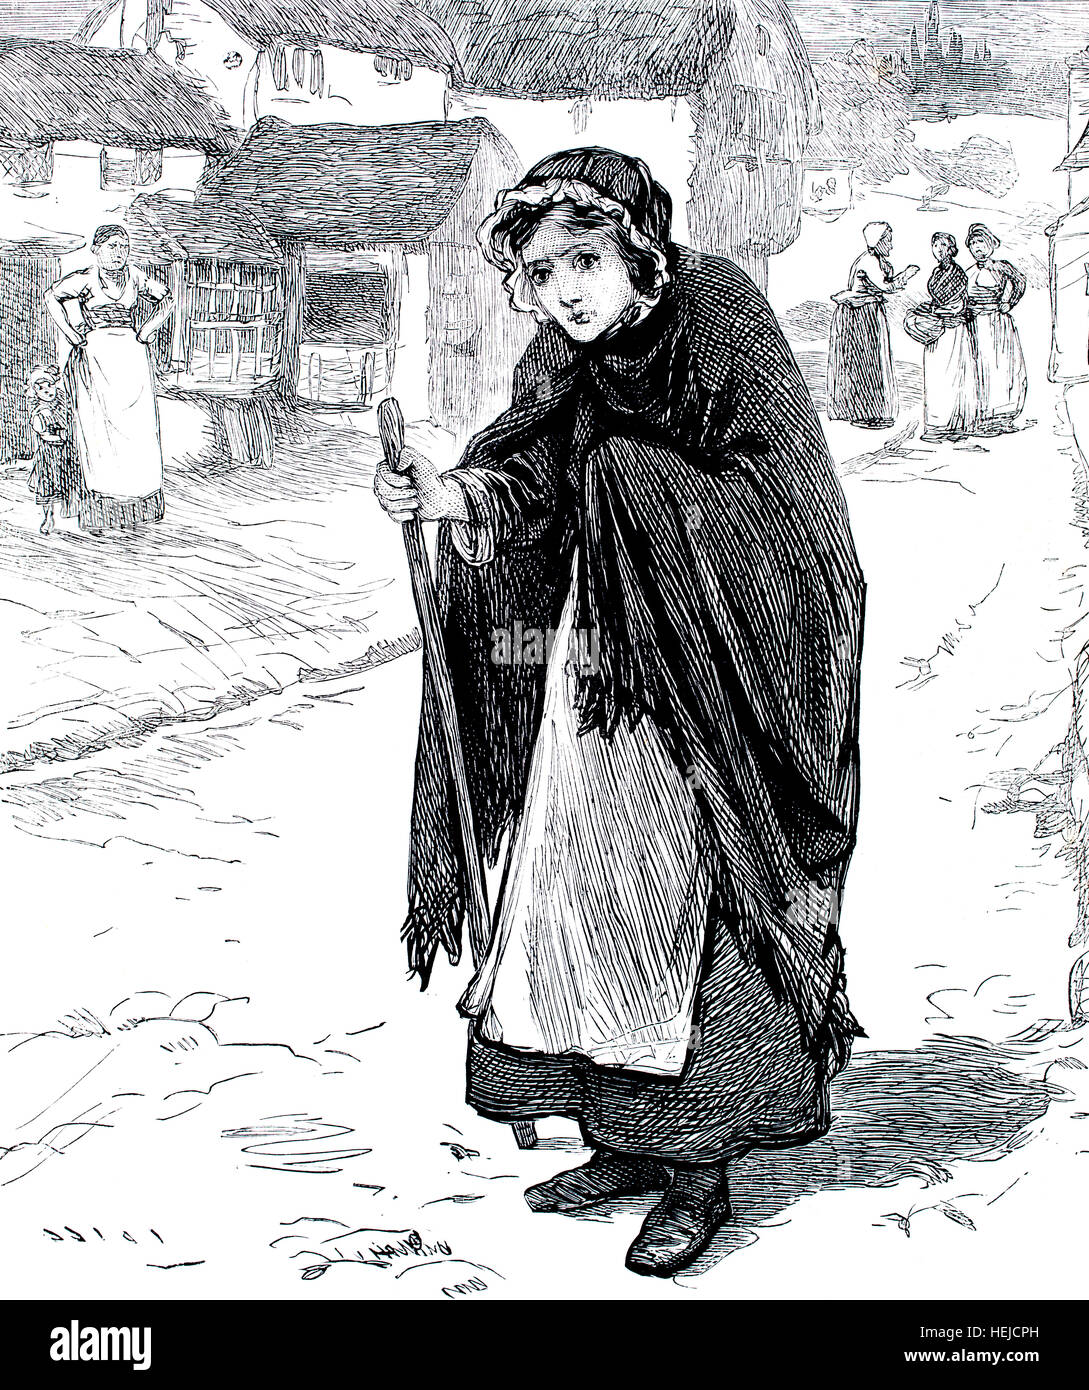 poor woman walking though Victorian village, illustration from 1884 Chatterbox weekly children’s paper Stock Photo